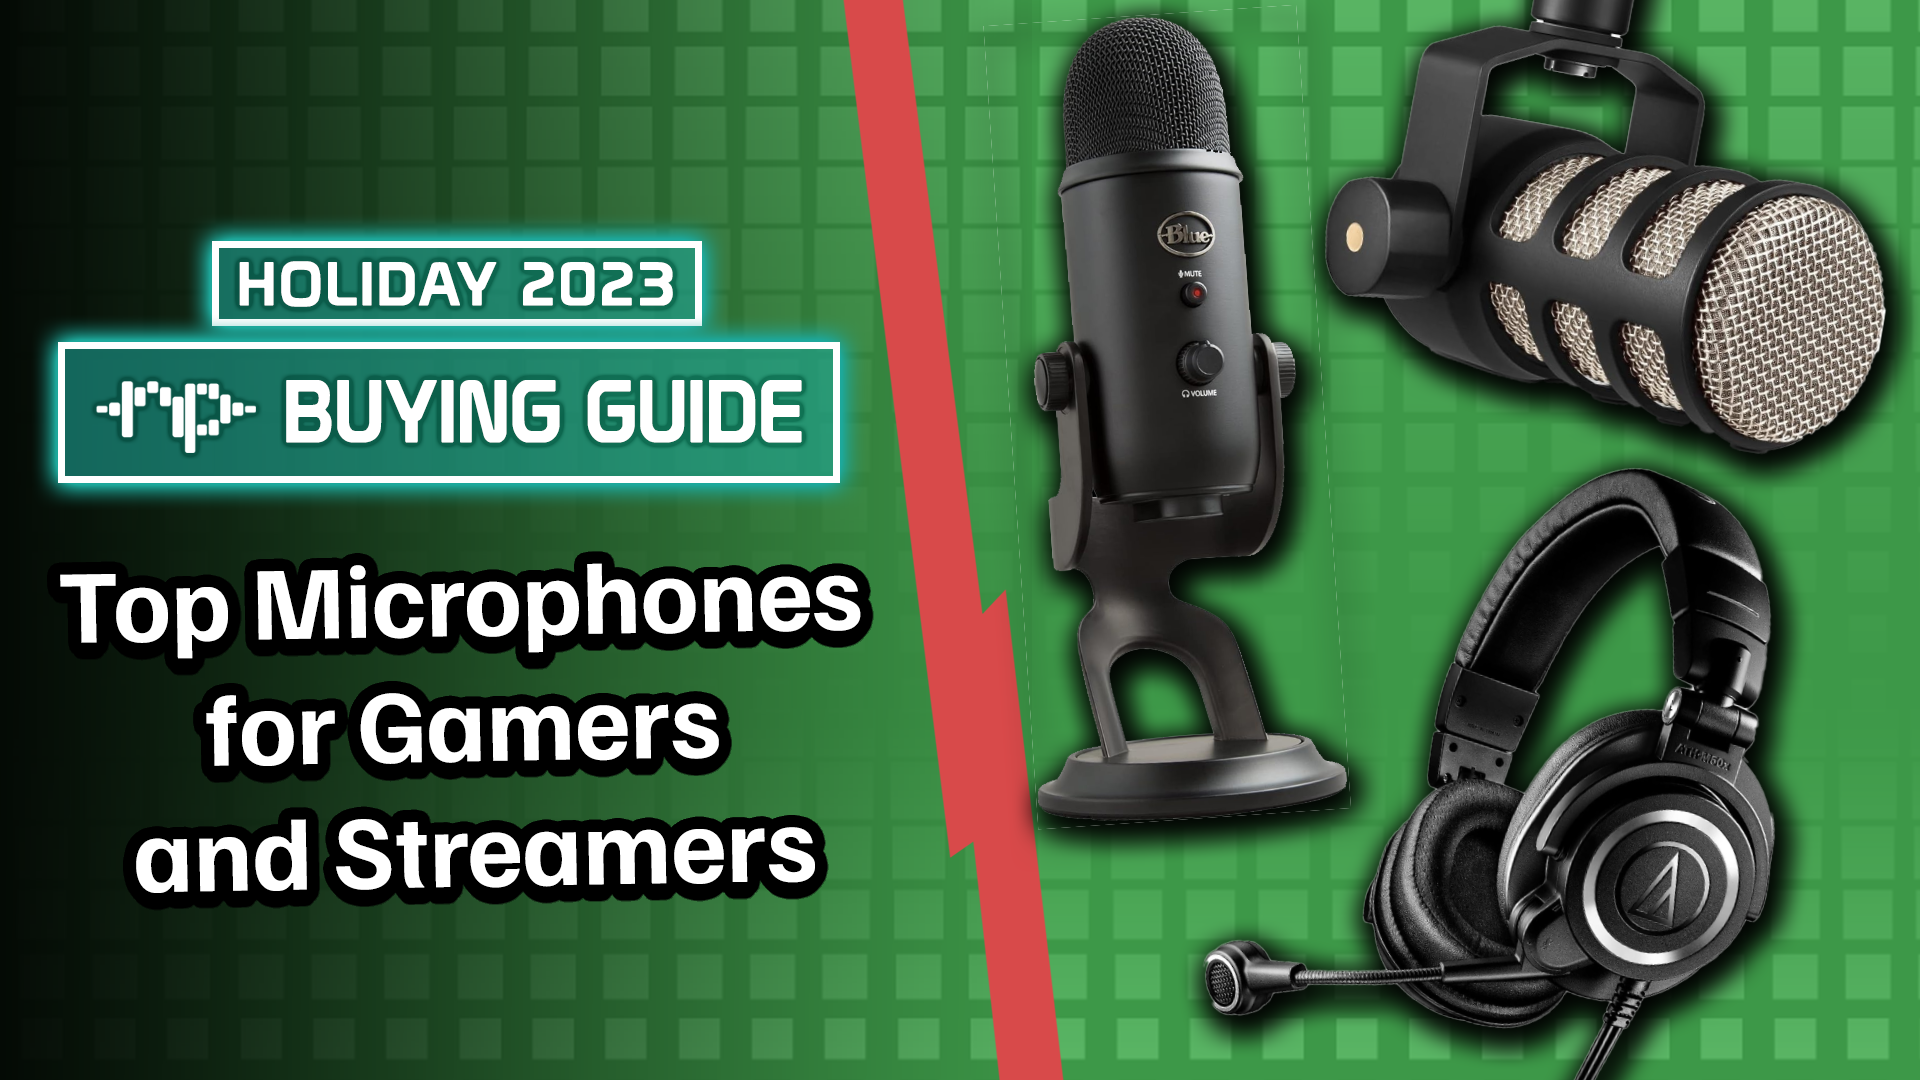 Top Microphones for Gamers and Streamers: Holiday Buying Guide 2023